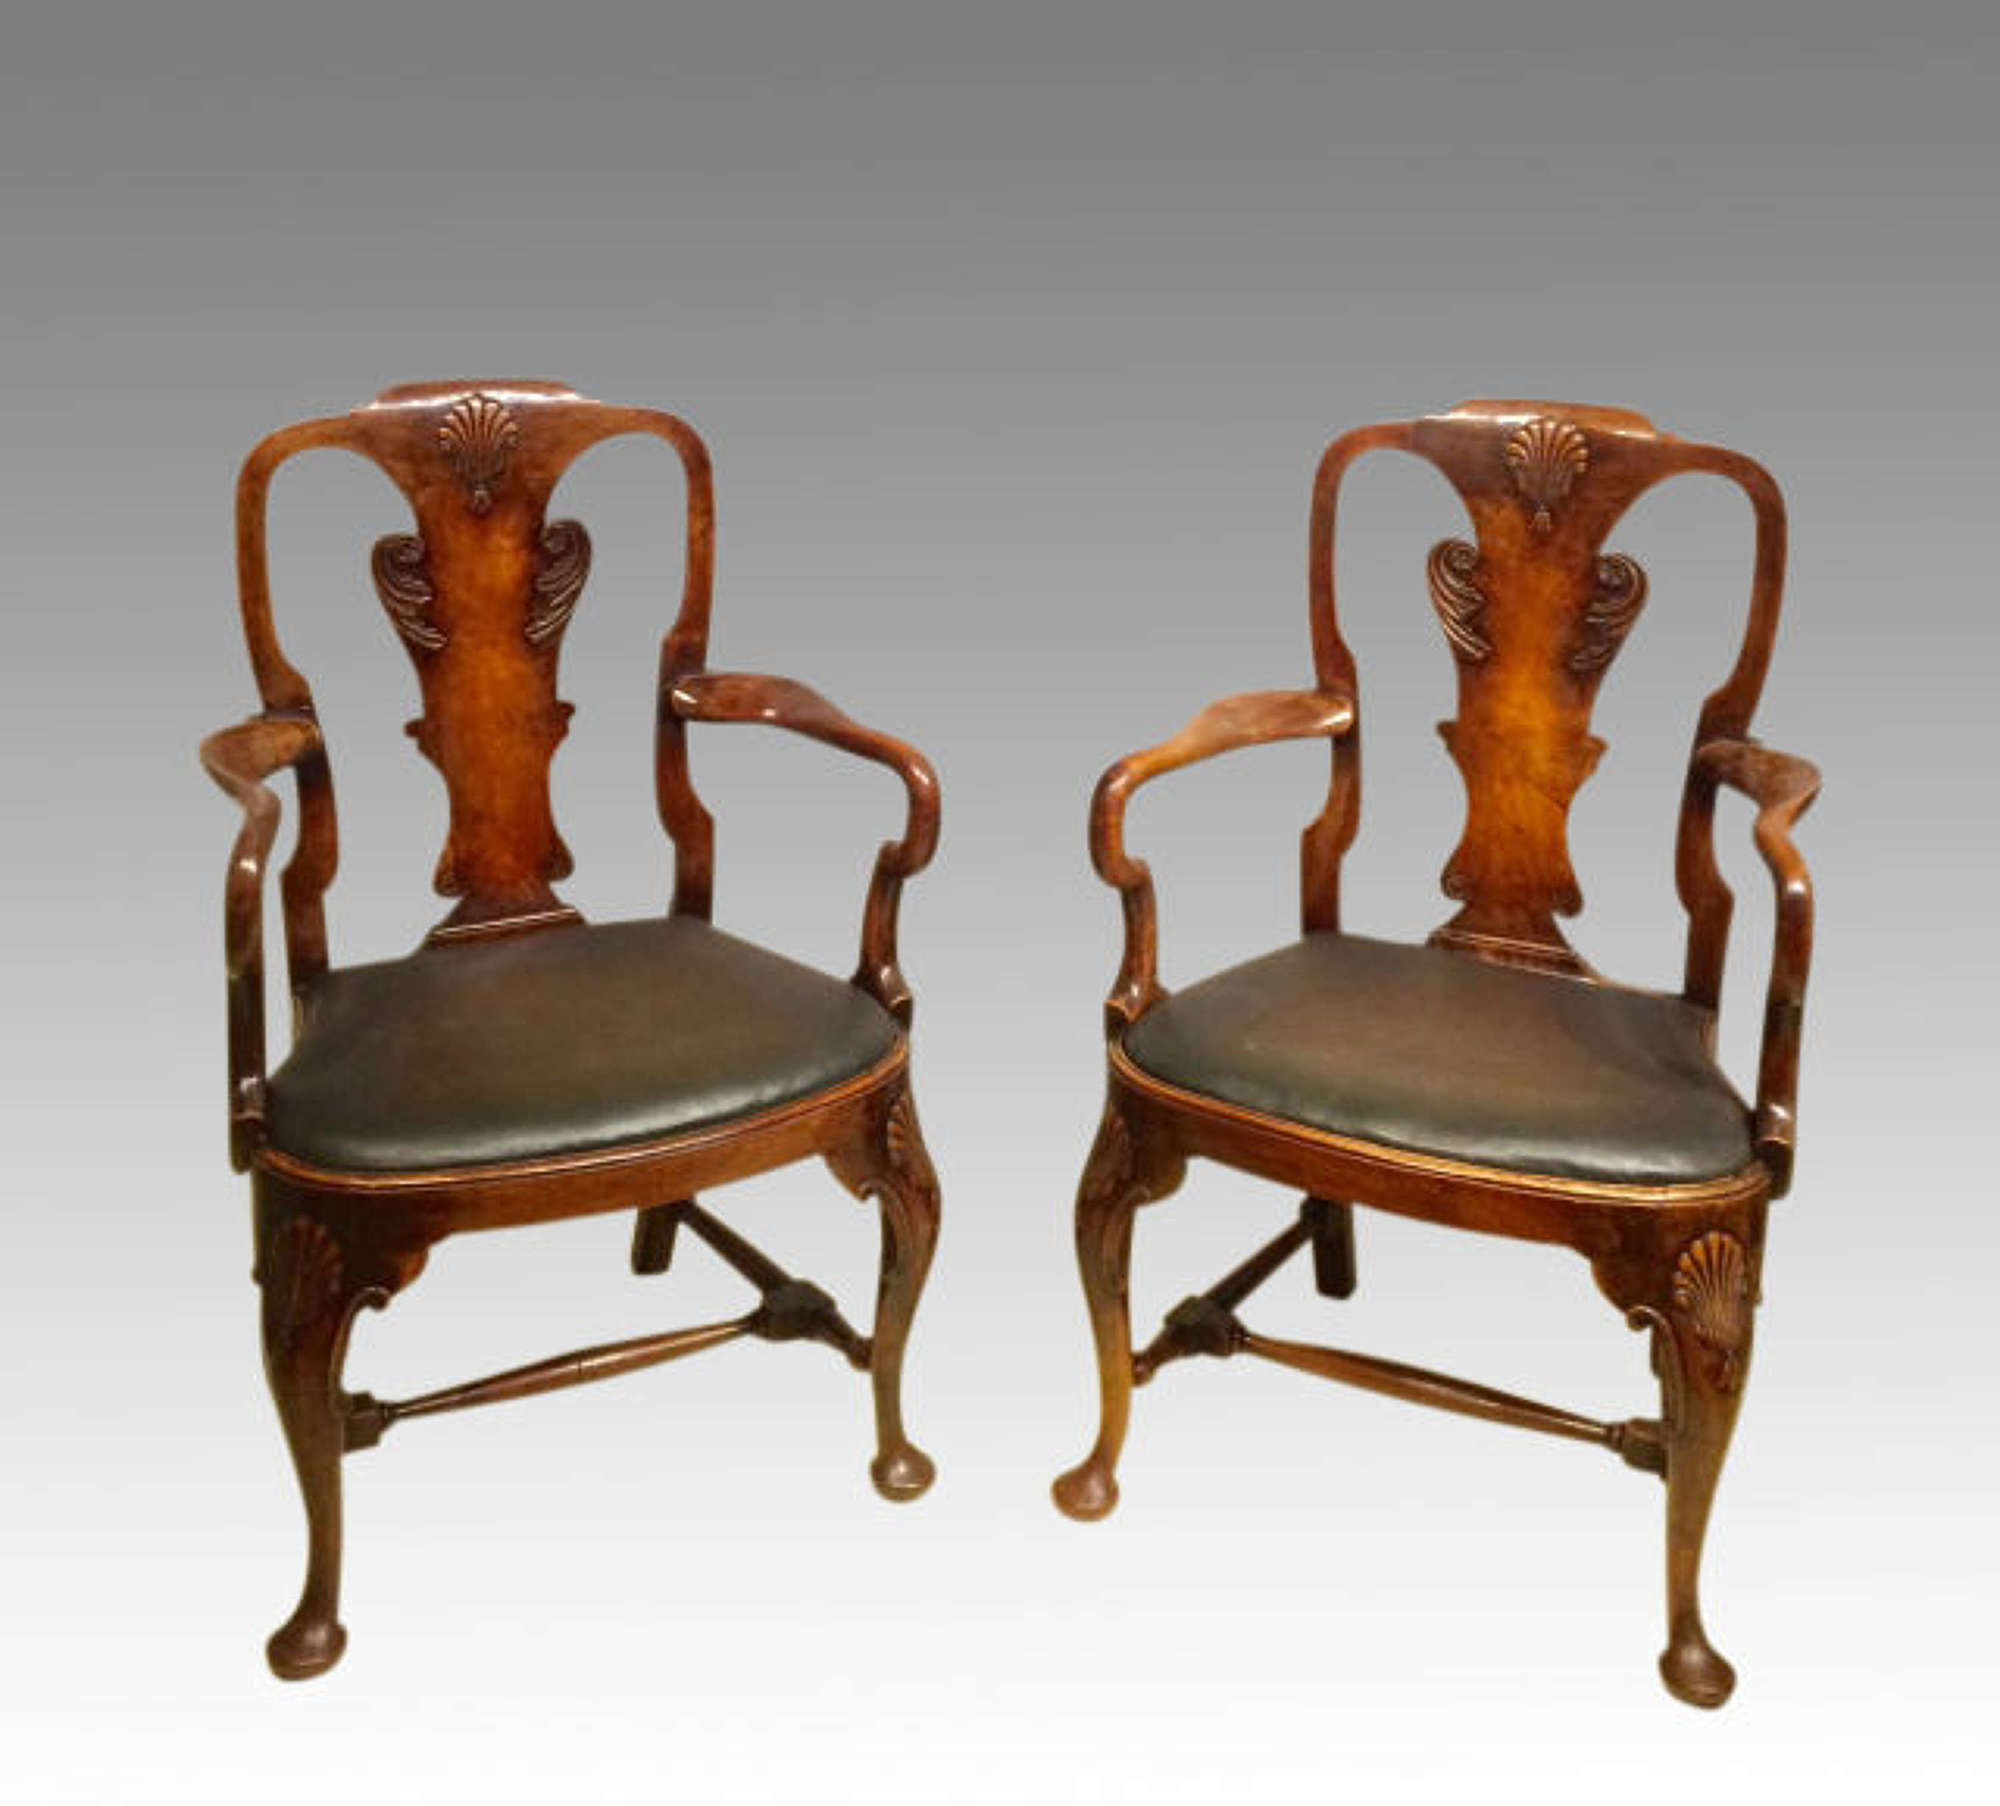 Pair of antique walnut armchairs in the Queen Anne style.